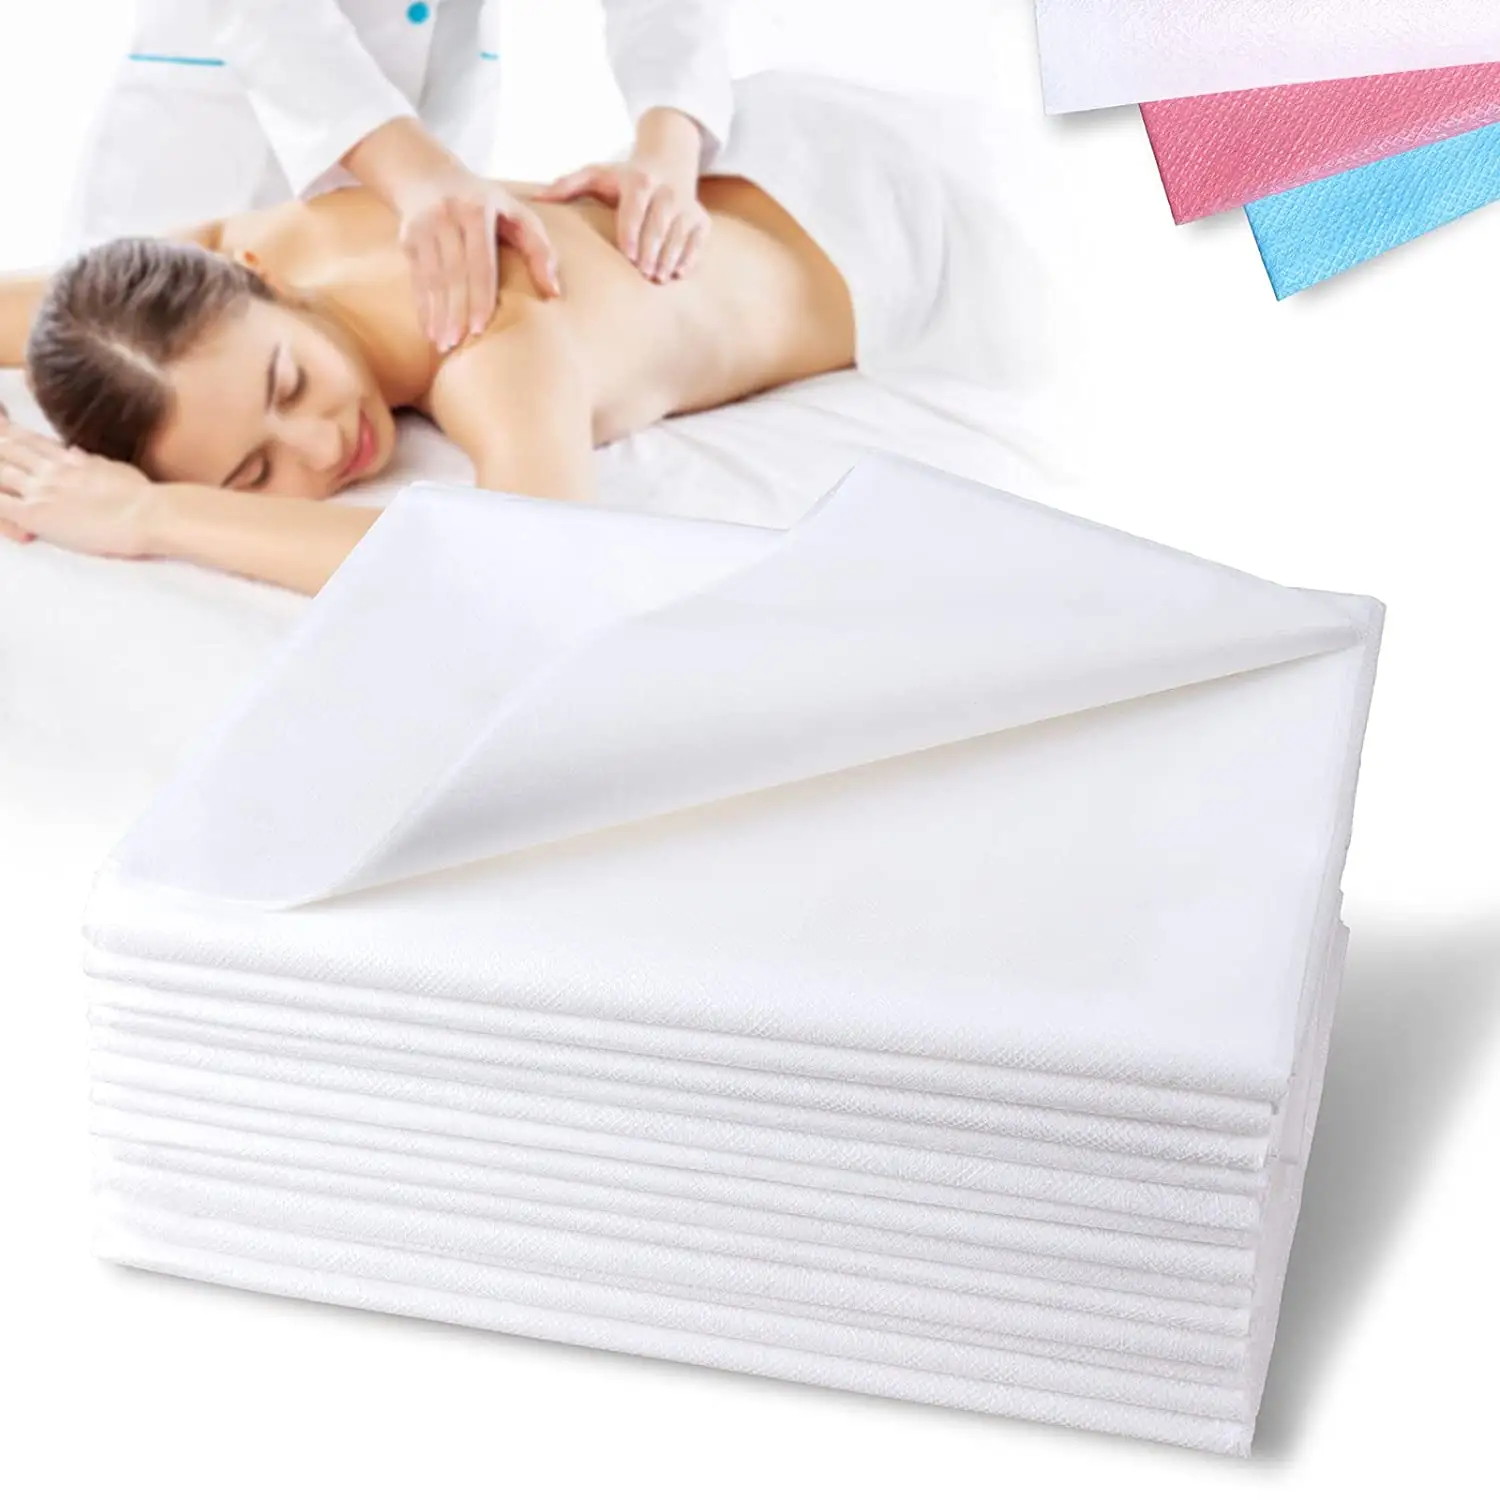 Non Woven Disposable Medical/Spa/Hotel/Hospital bed cover disposable massage bed cover